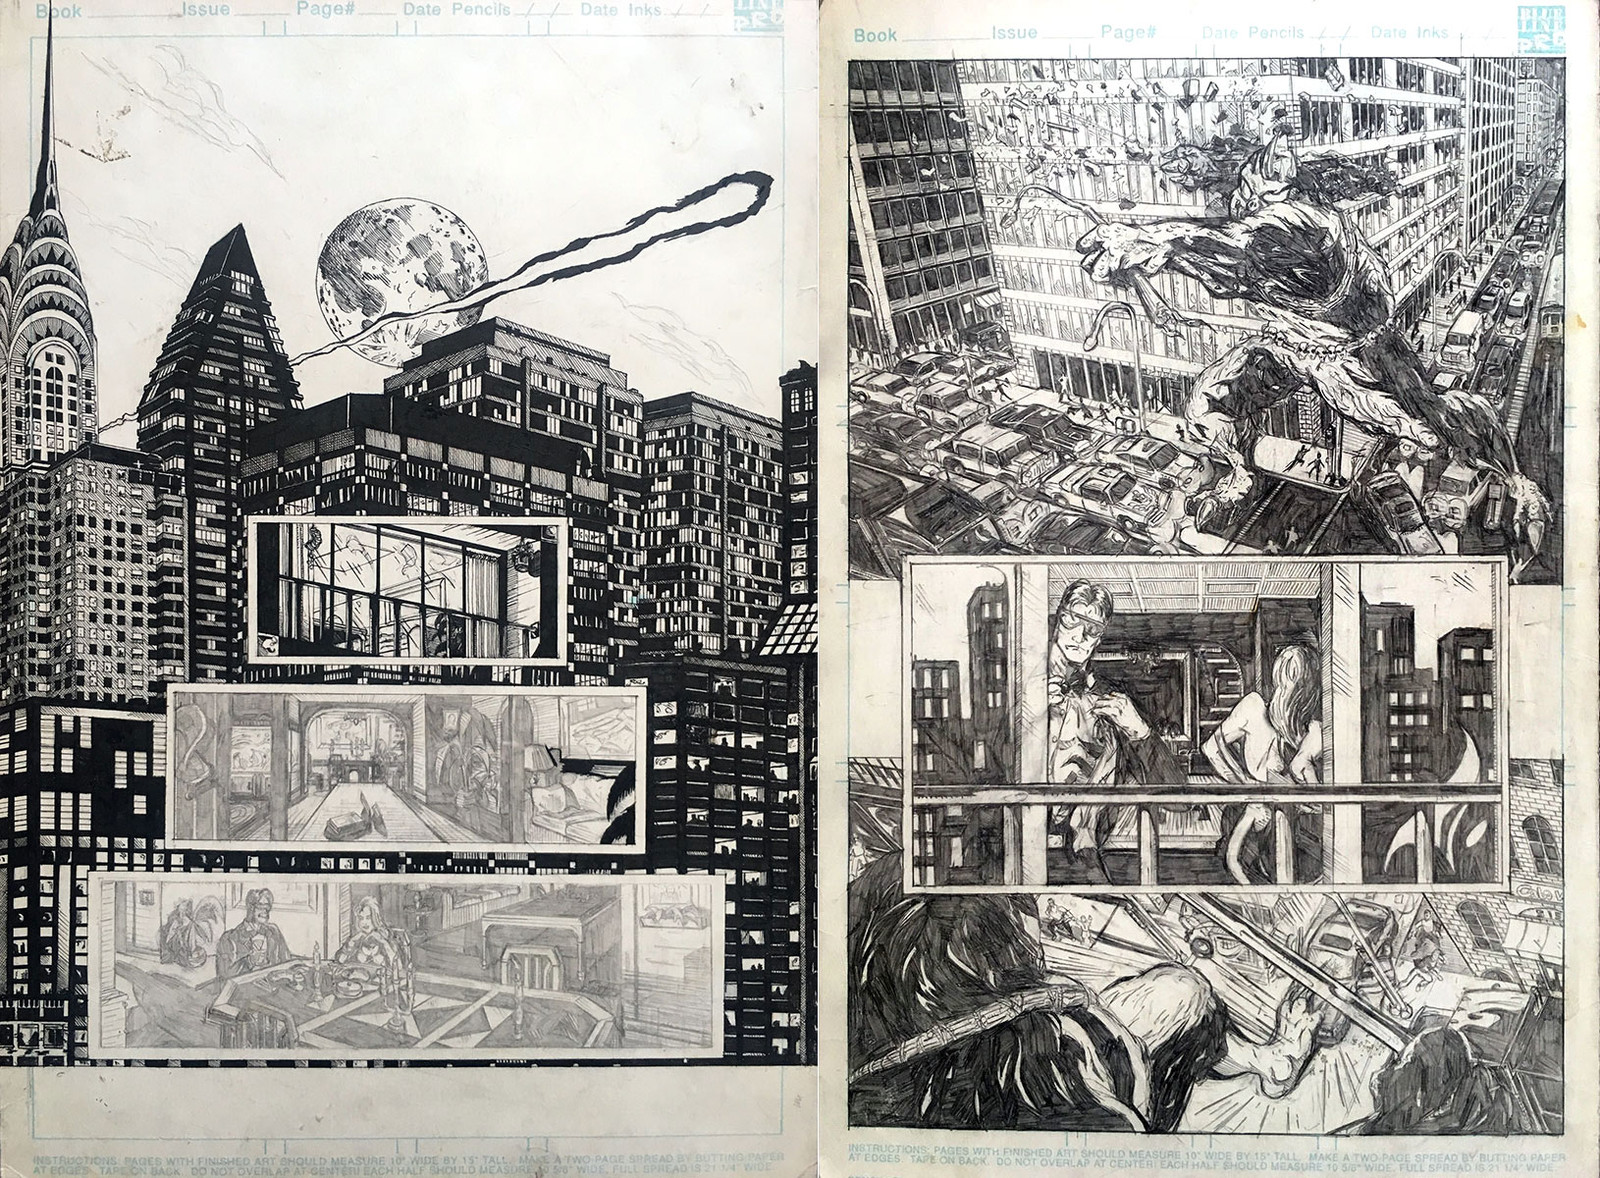 This is a 2-page spread done for Glass Door Graphics years ago. It was drawn to a sample X-Men script. I had started to ink page 1 for my own gratification but never finished. This was right before I switched to tech pens to do cityscape illustrations.